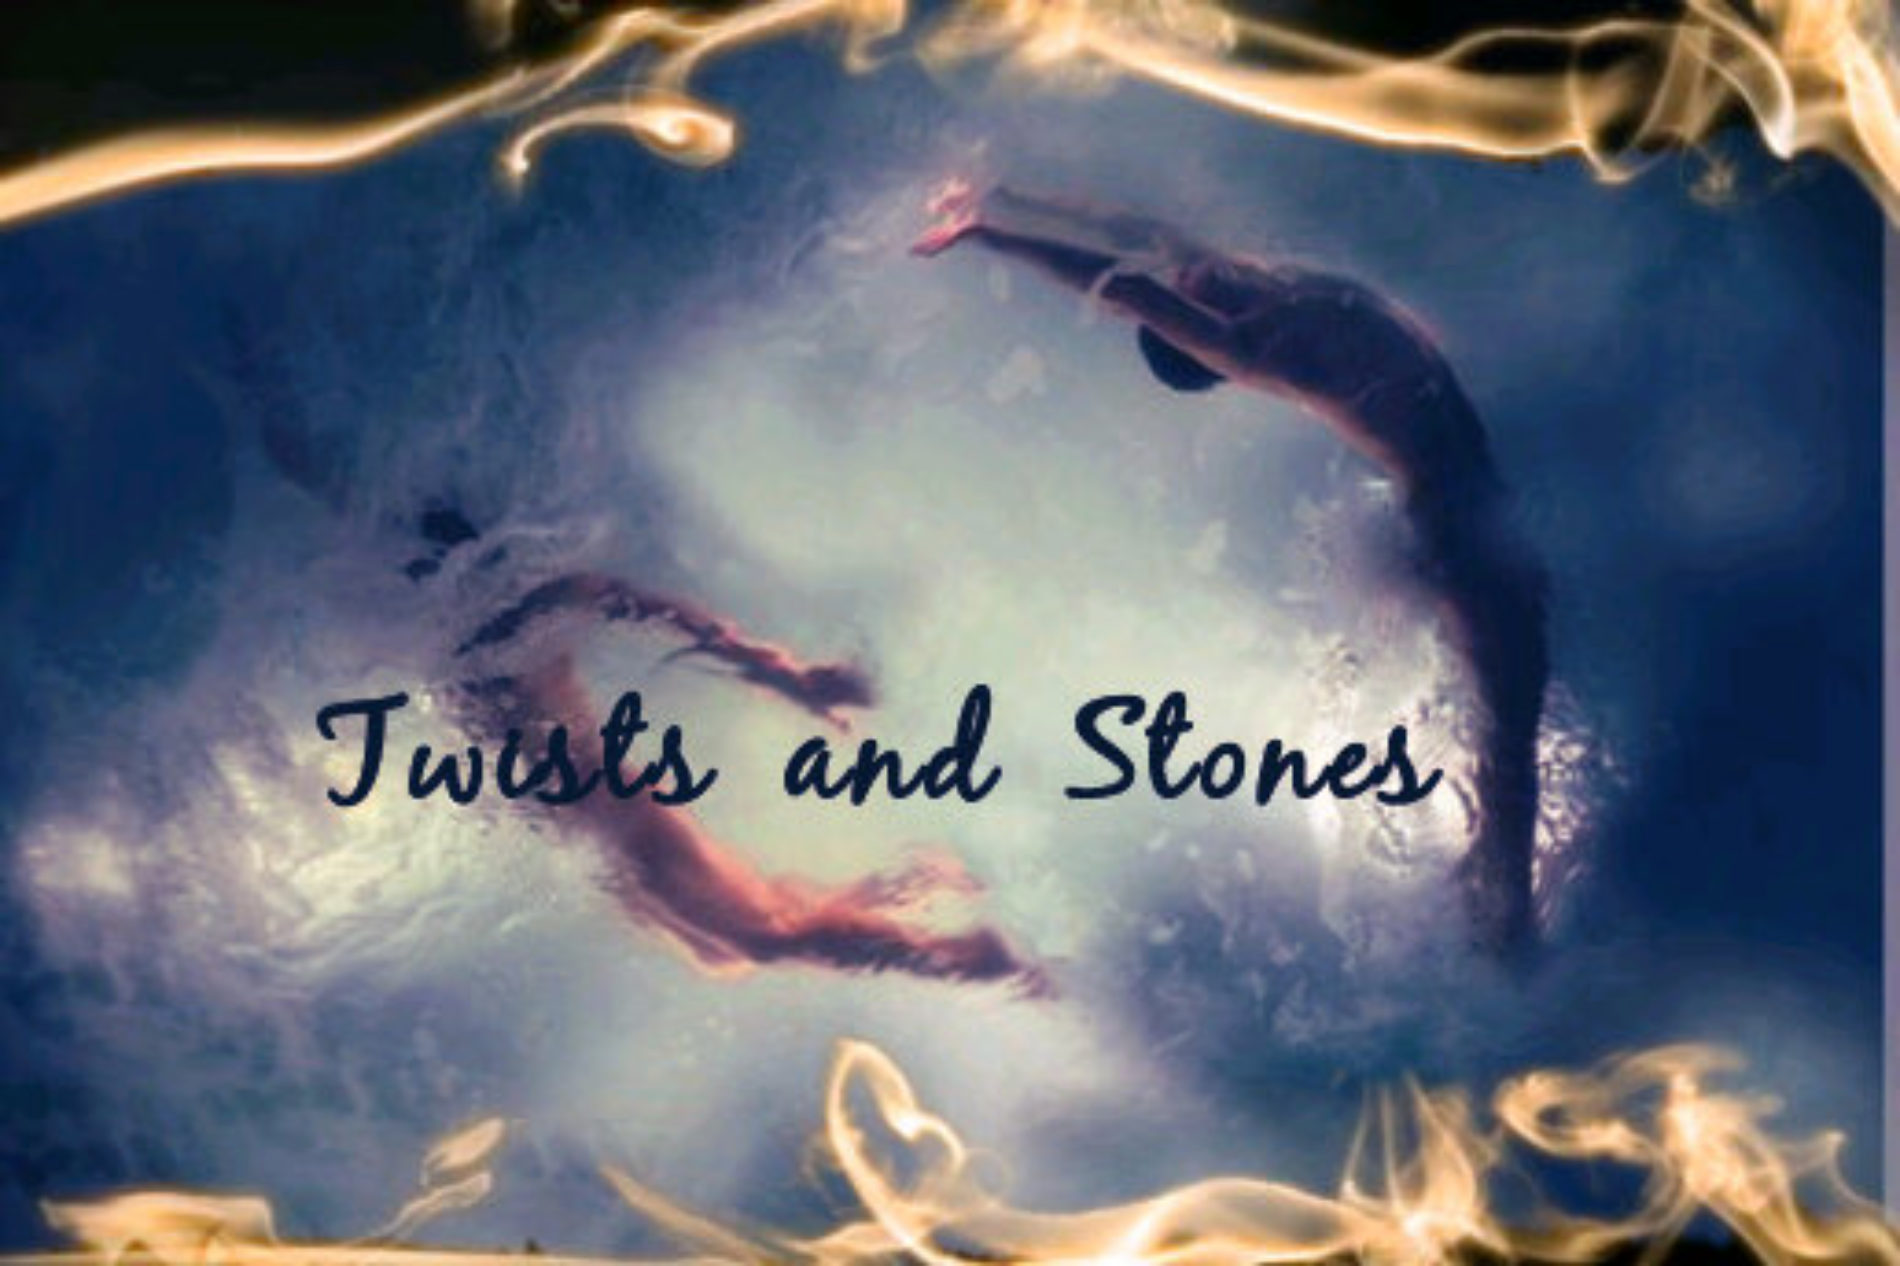 TWISTS AND STONES (Episode 7)